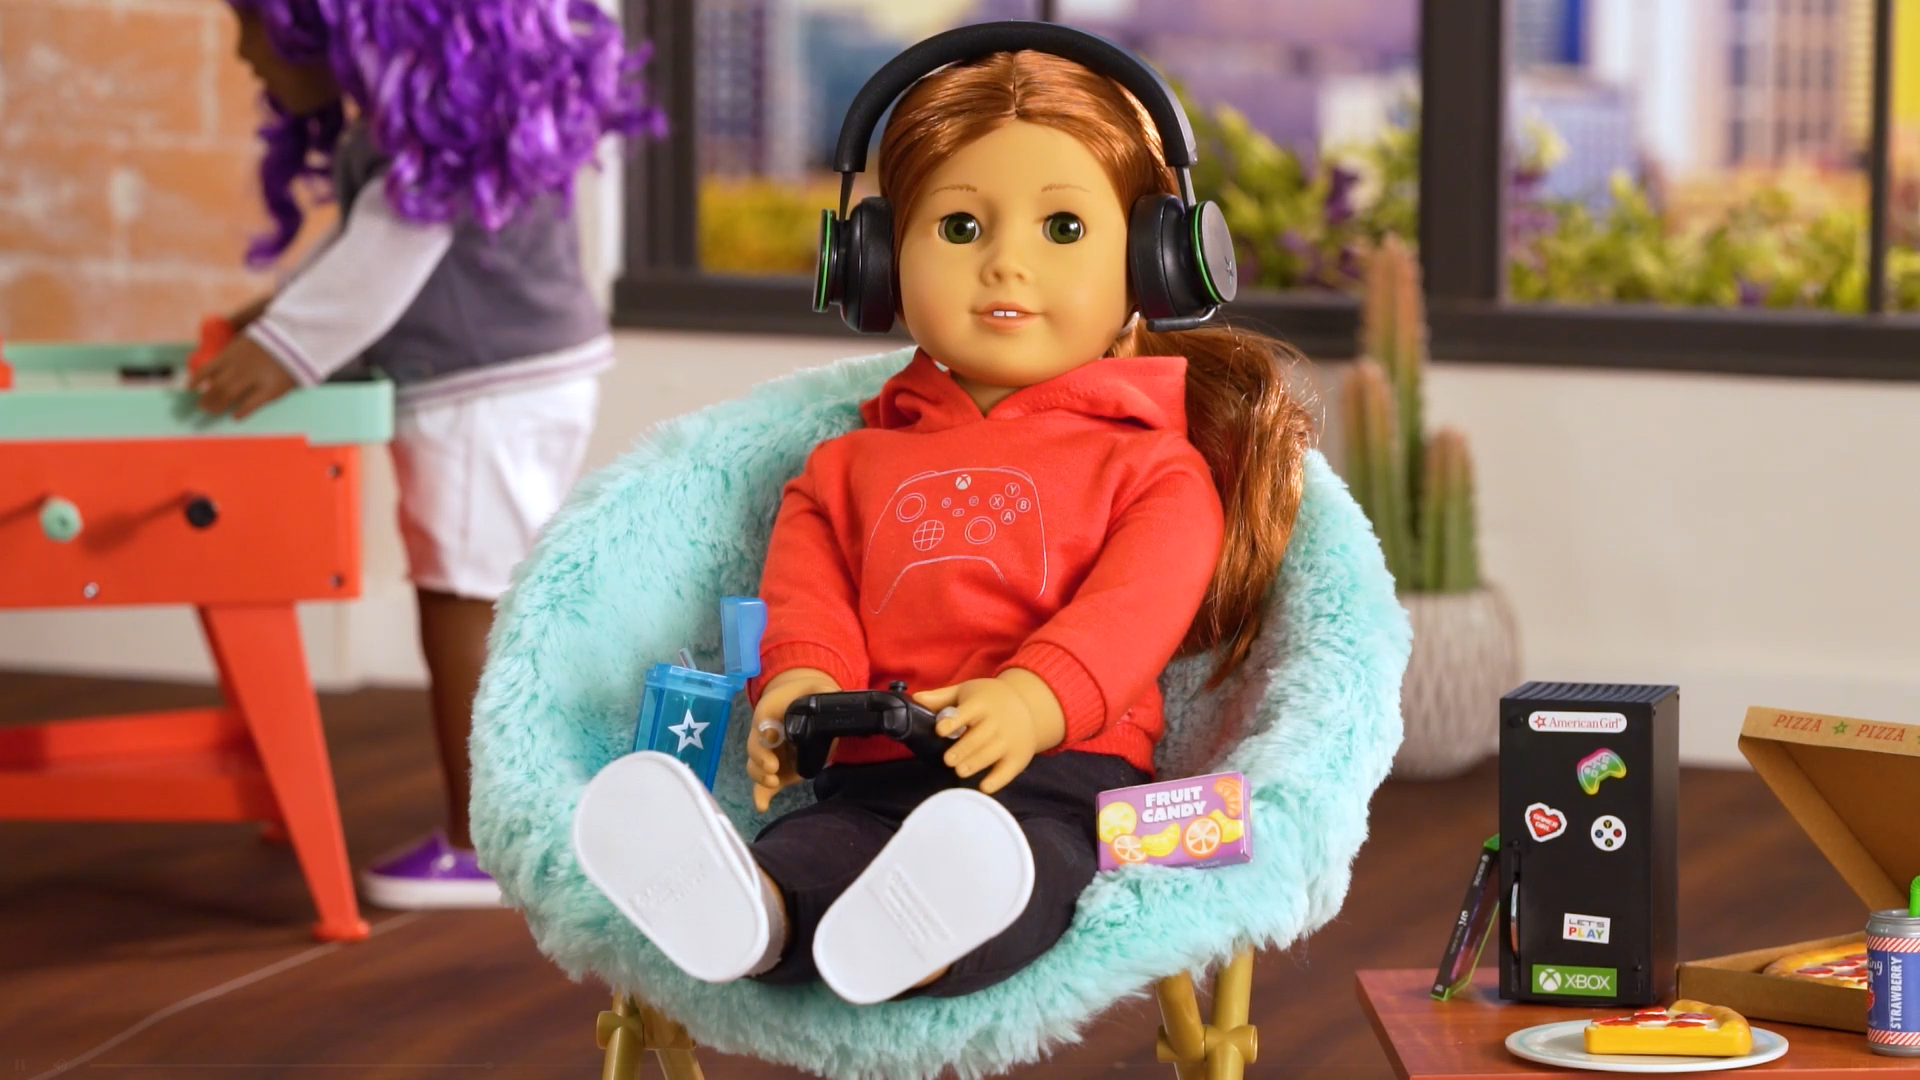 ‘Actually Xbox Game Pass is a great deal,’ says gamer American Girl doll